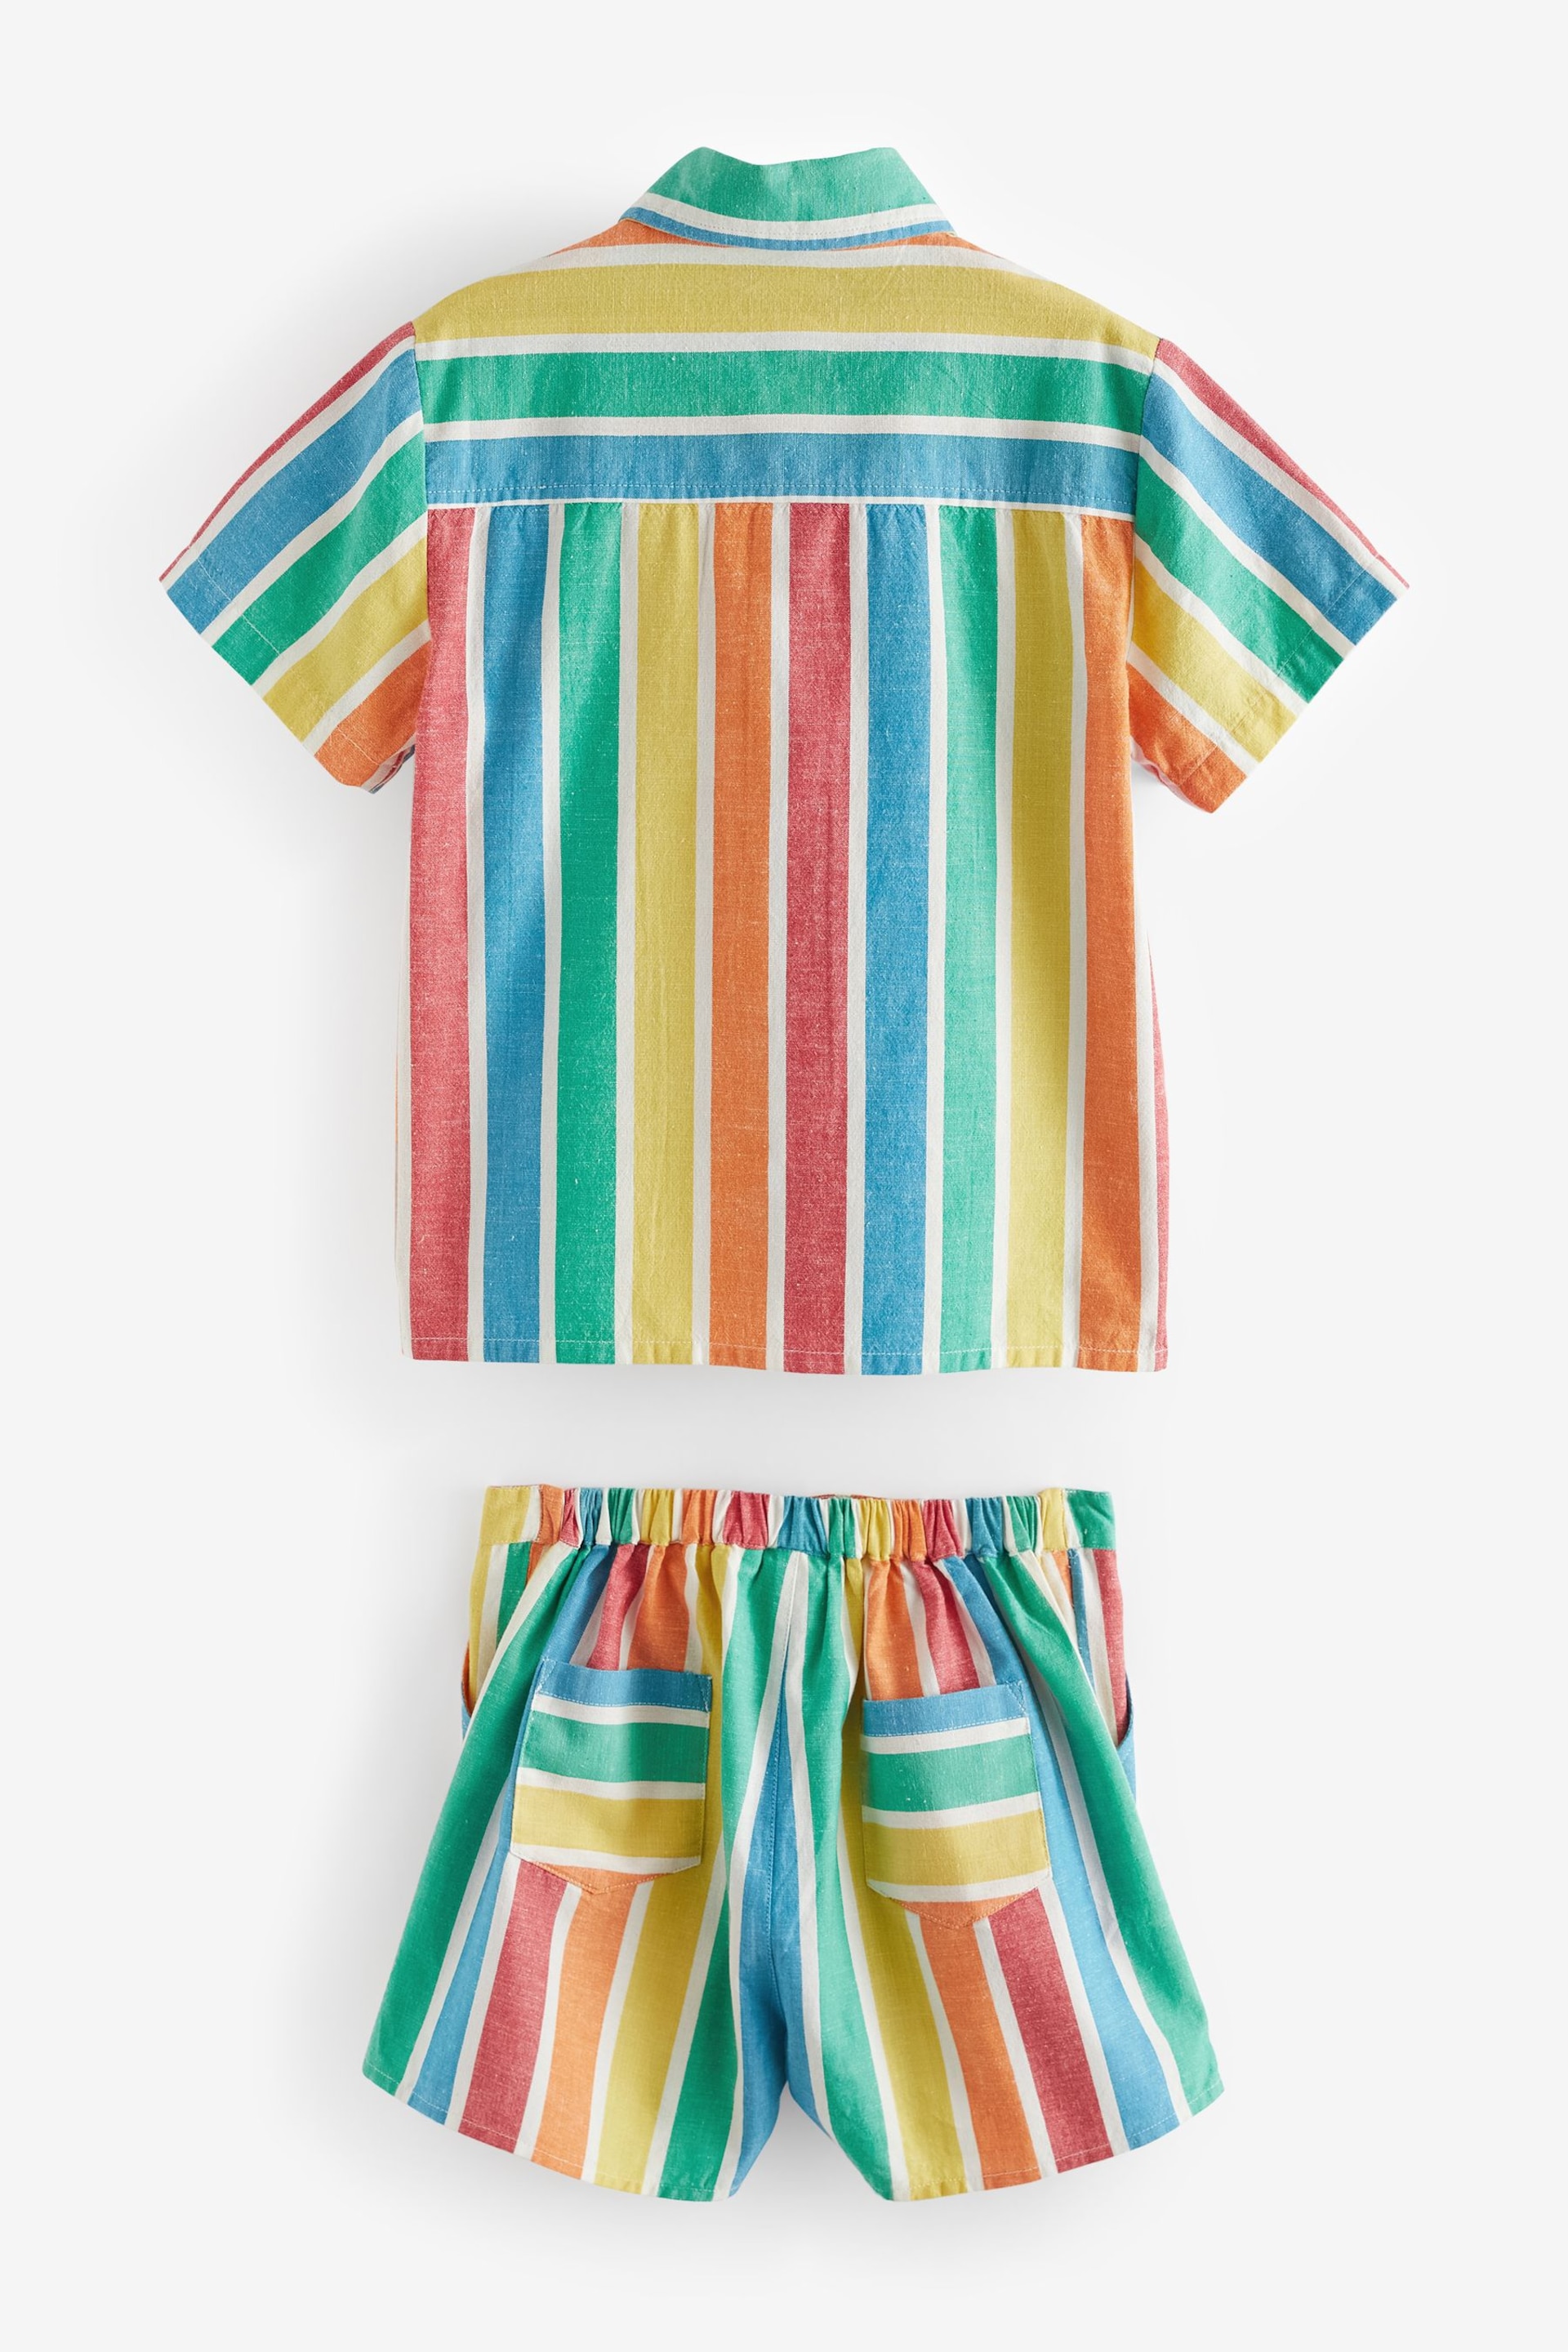 Little Bird by Jools Oliver Multi/Stripe Colourful Shirt and Short Set - Image 6 of 6